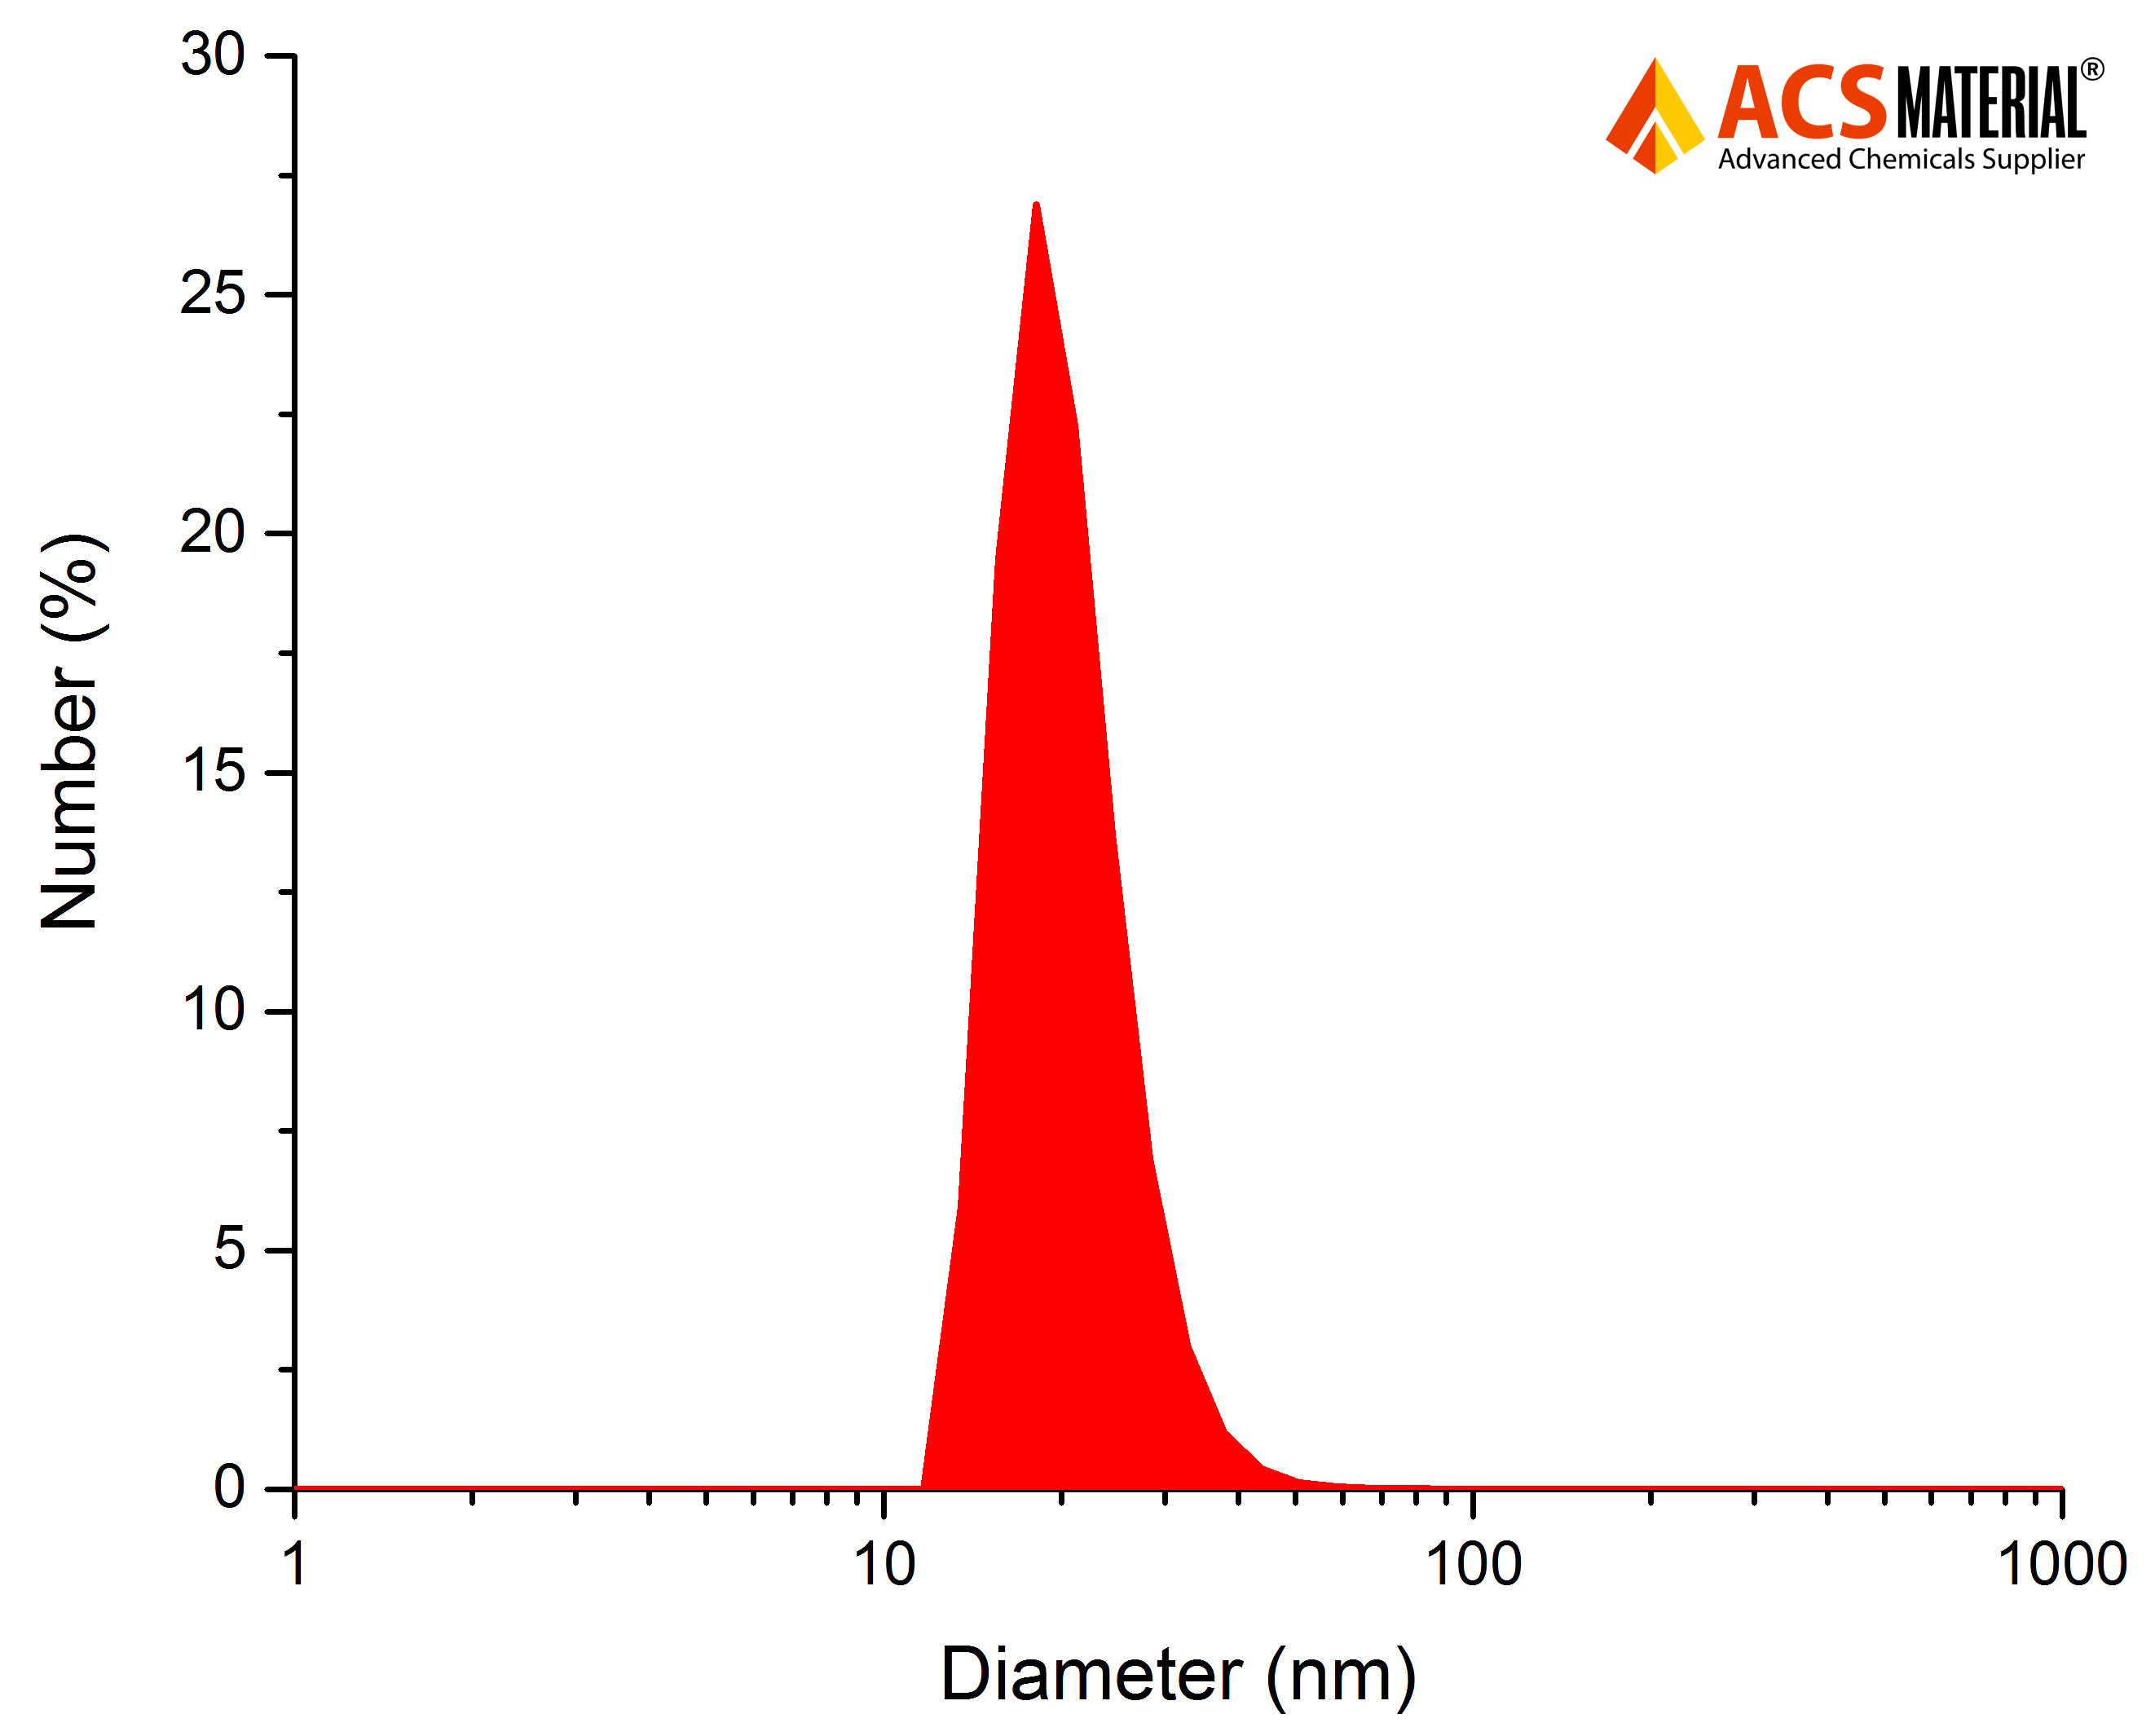 Typical Particle Size Distribution Image of ACS Material Upconverting Nanoparticles From Dynamiclight Scattering Measurement